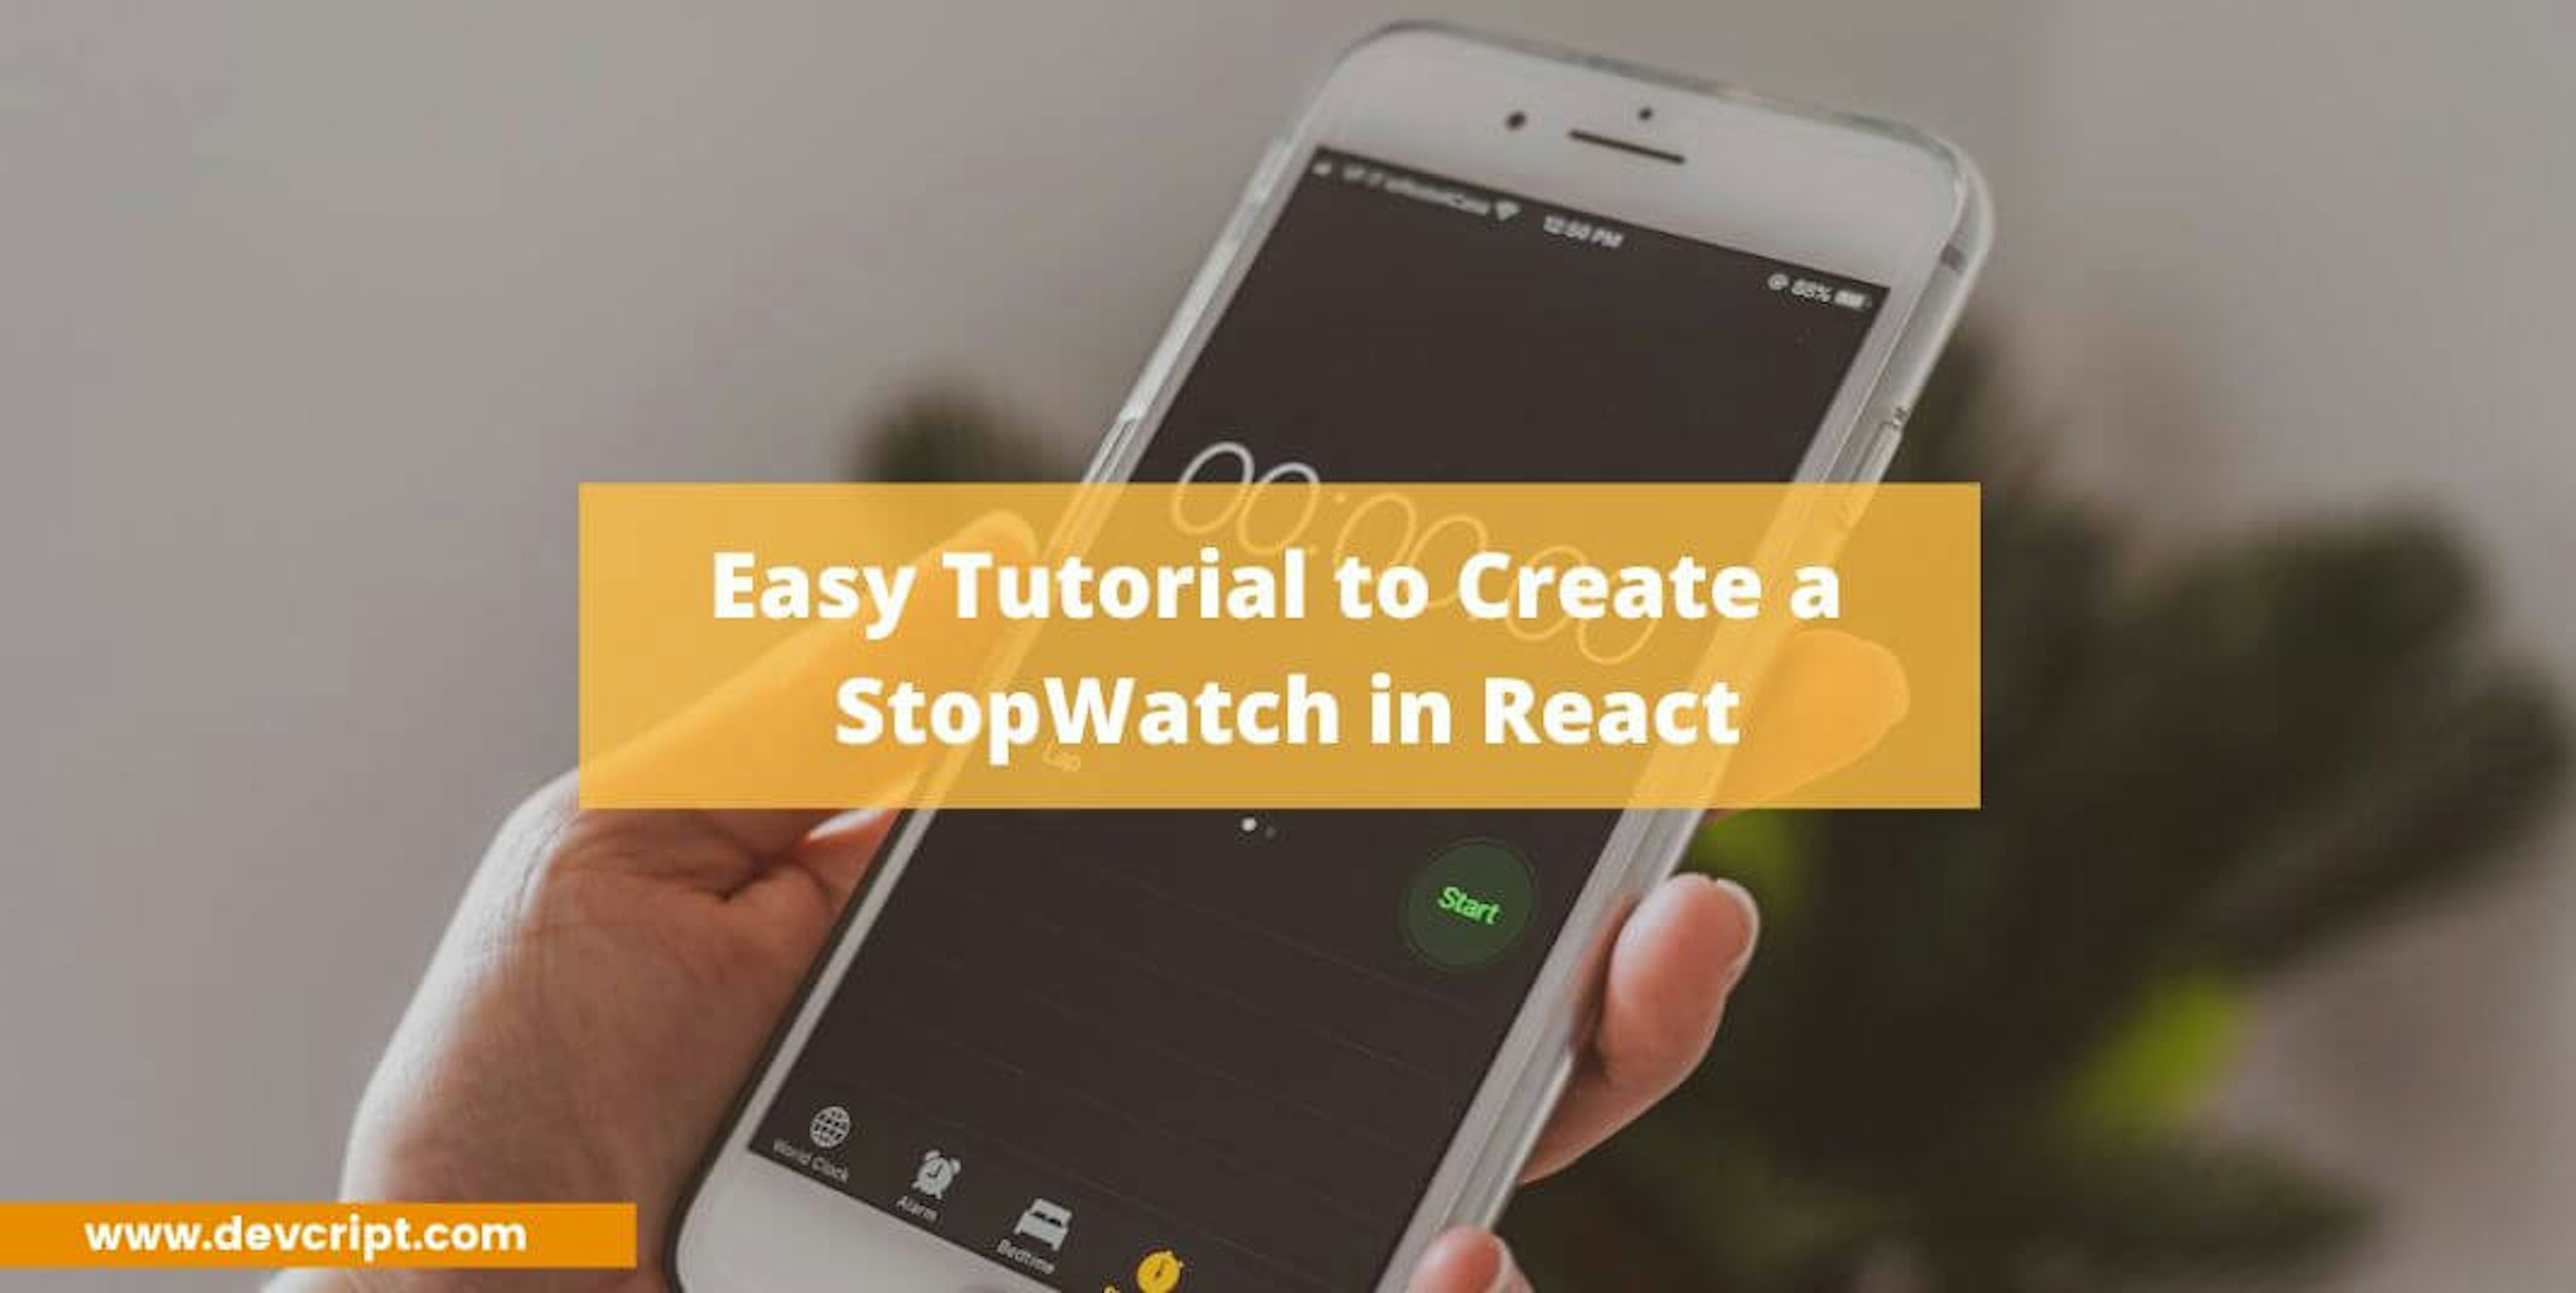 Easy Tutorial to Create a StopWatch in React